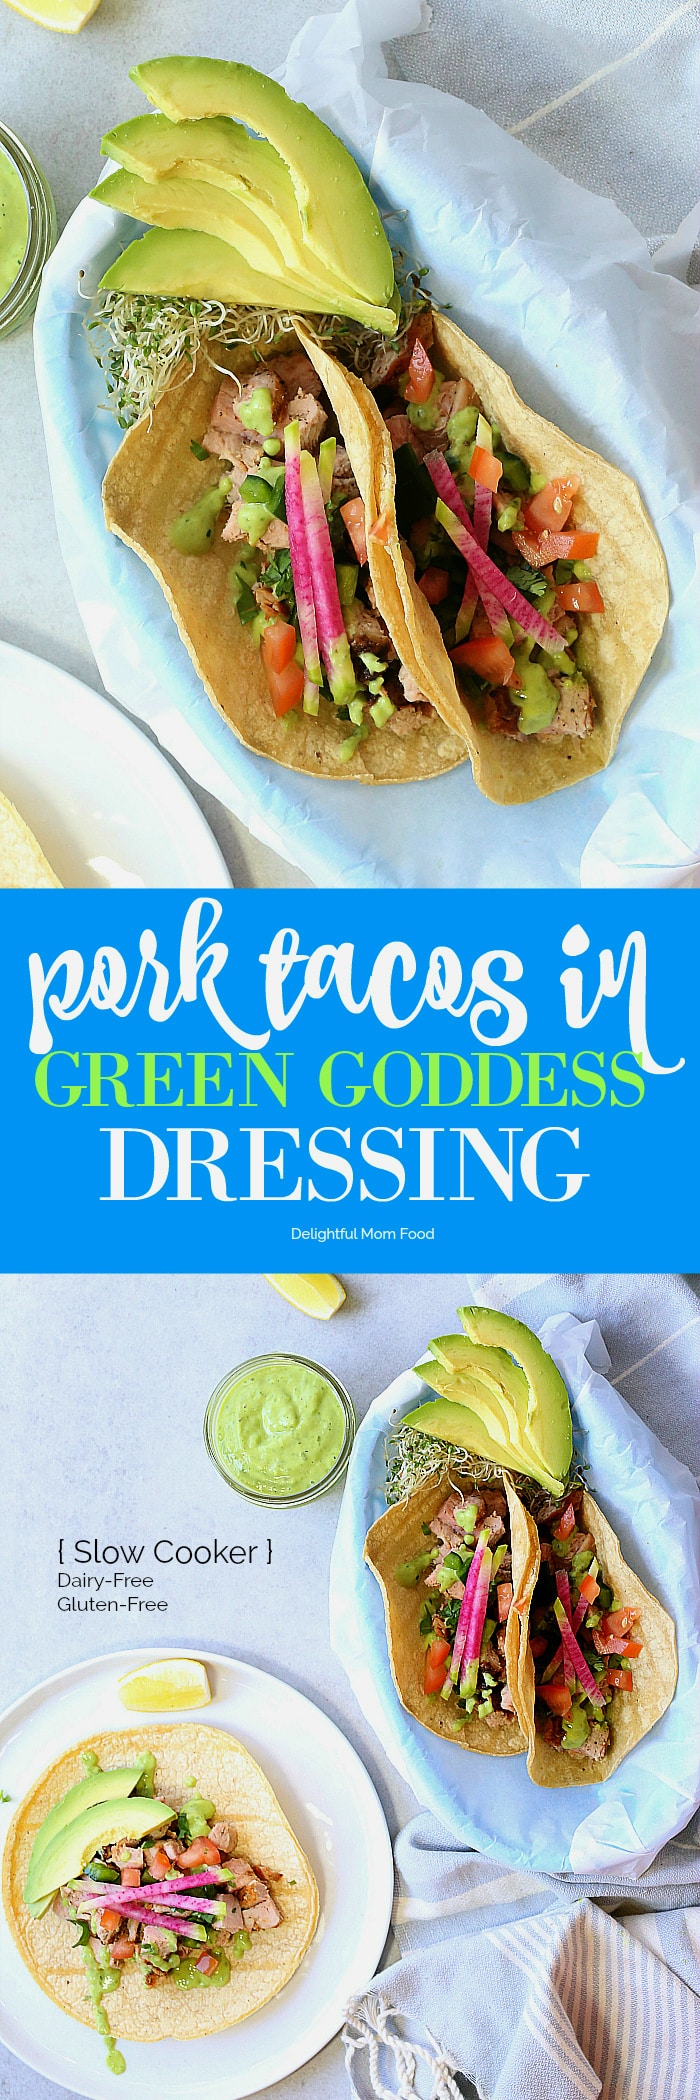 Slow cooker pork tacos slowly cooked in, and then drizzled with zesty green goddess dressing. An easy dinner and meal-prep with left overs that can serve another meal! #slowcooker #crockpot #pork #tacos #healthy #glutenfree #recipe #easy #dressing | delightfulmomfood.com